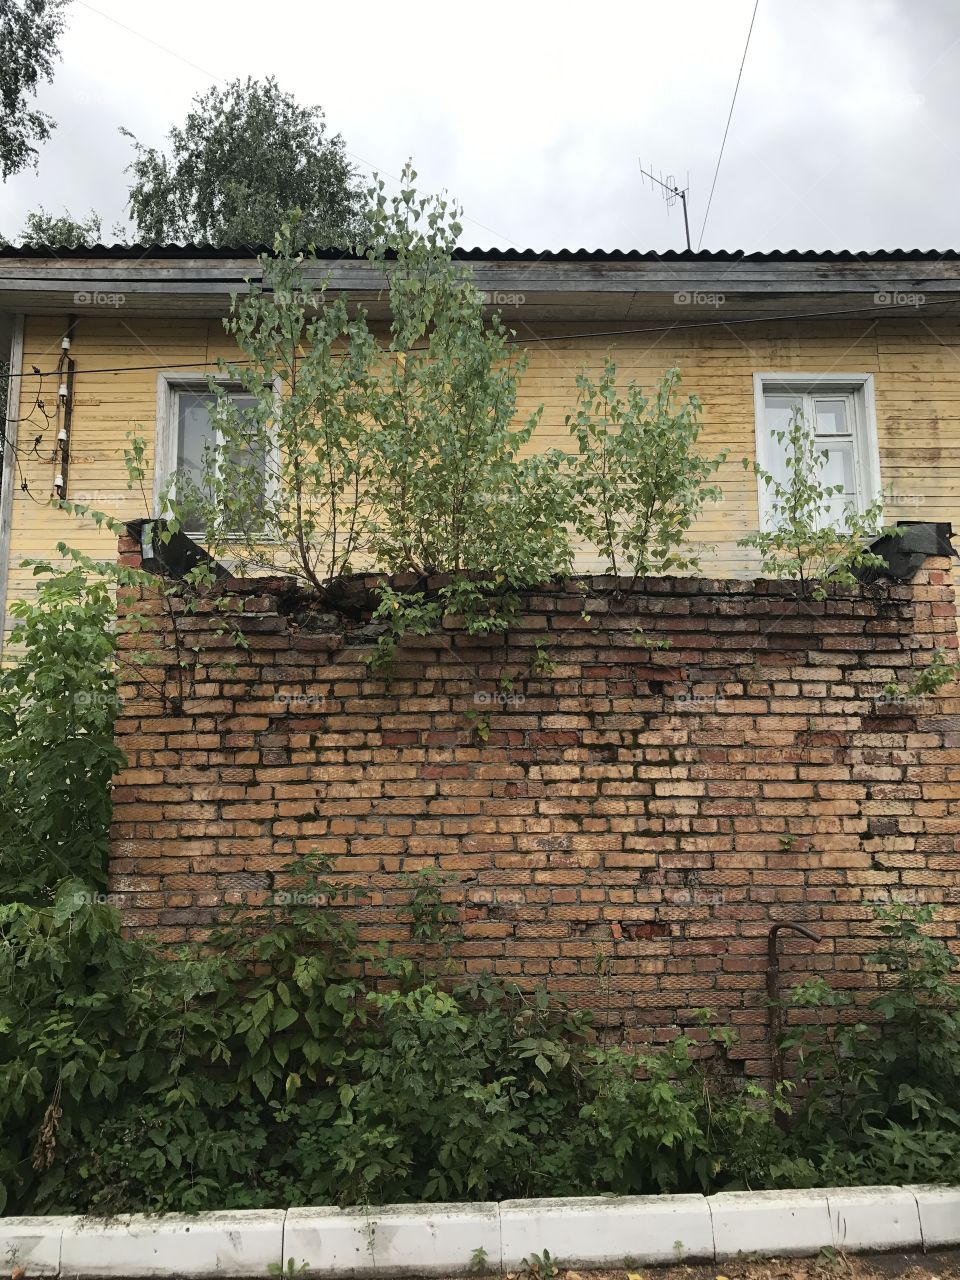 House, Building, Architecture, Family, Wall